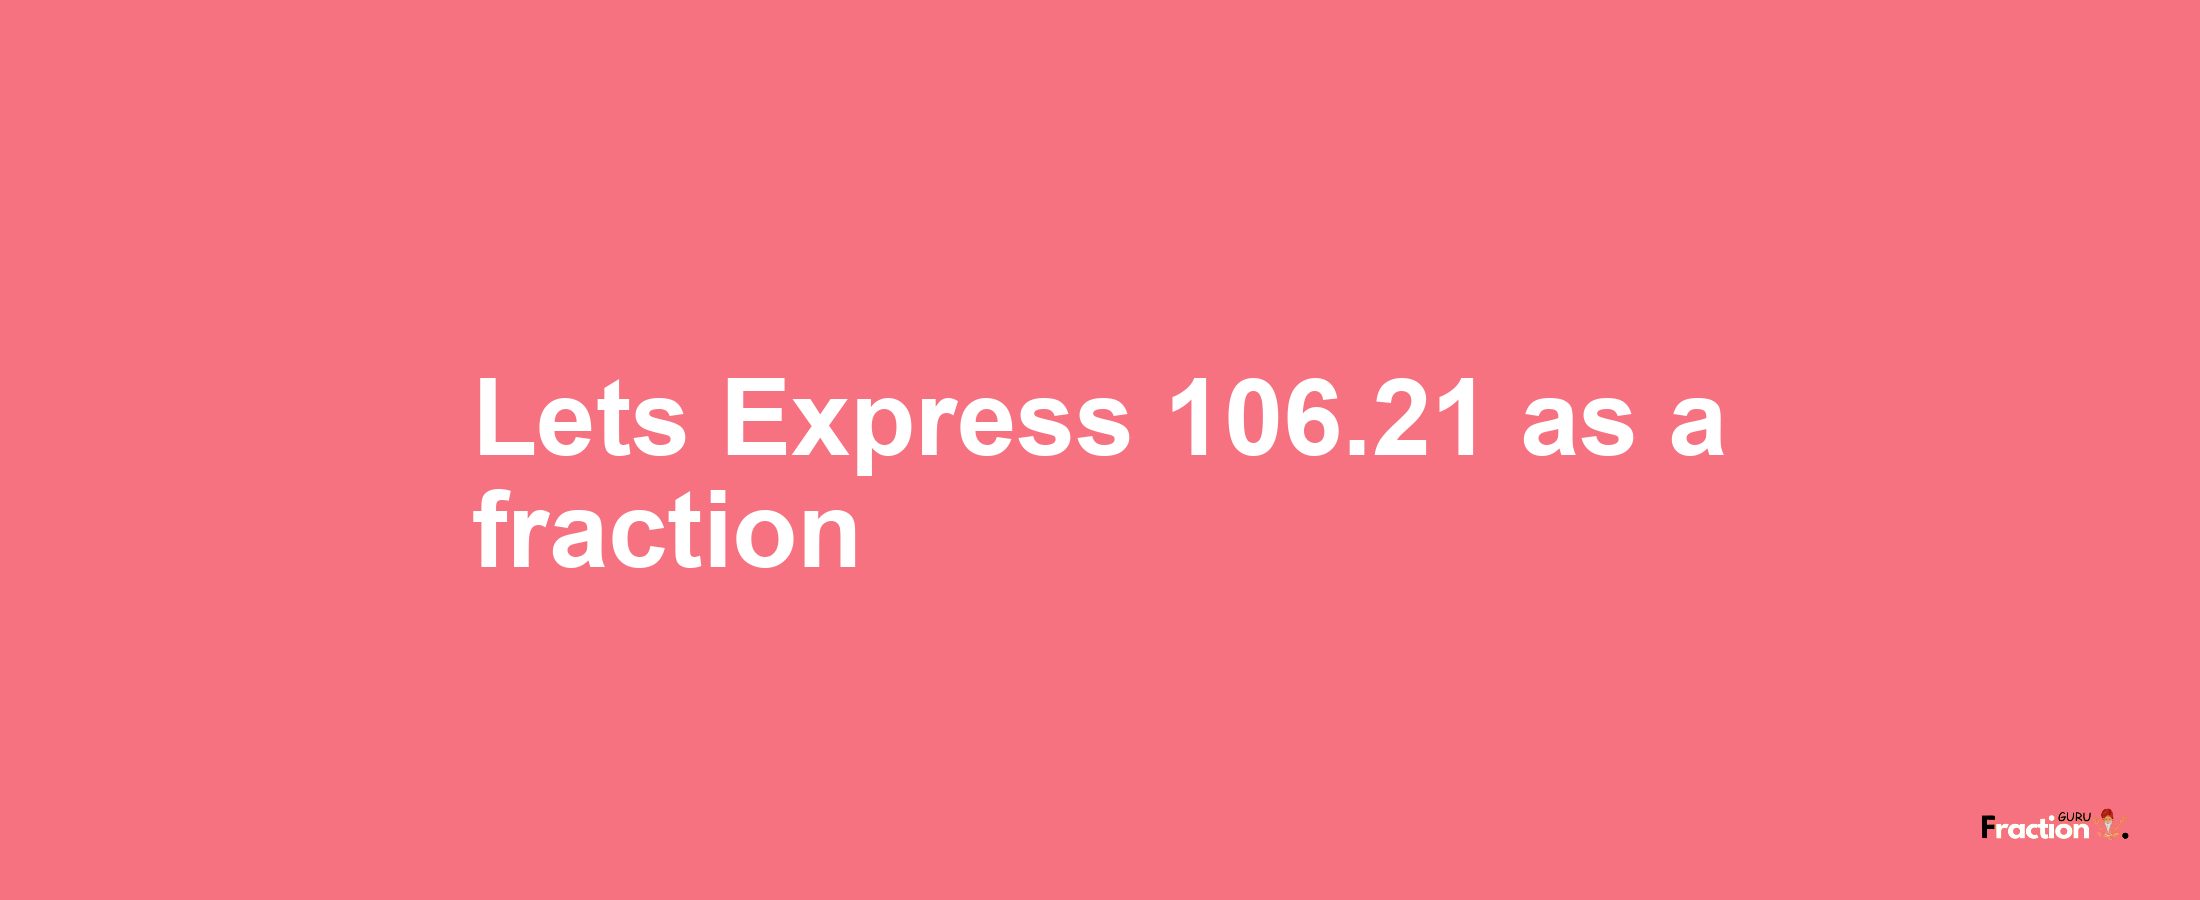 Lets Express 106.21 as afraction